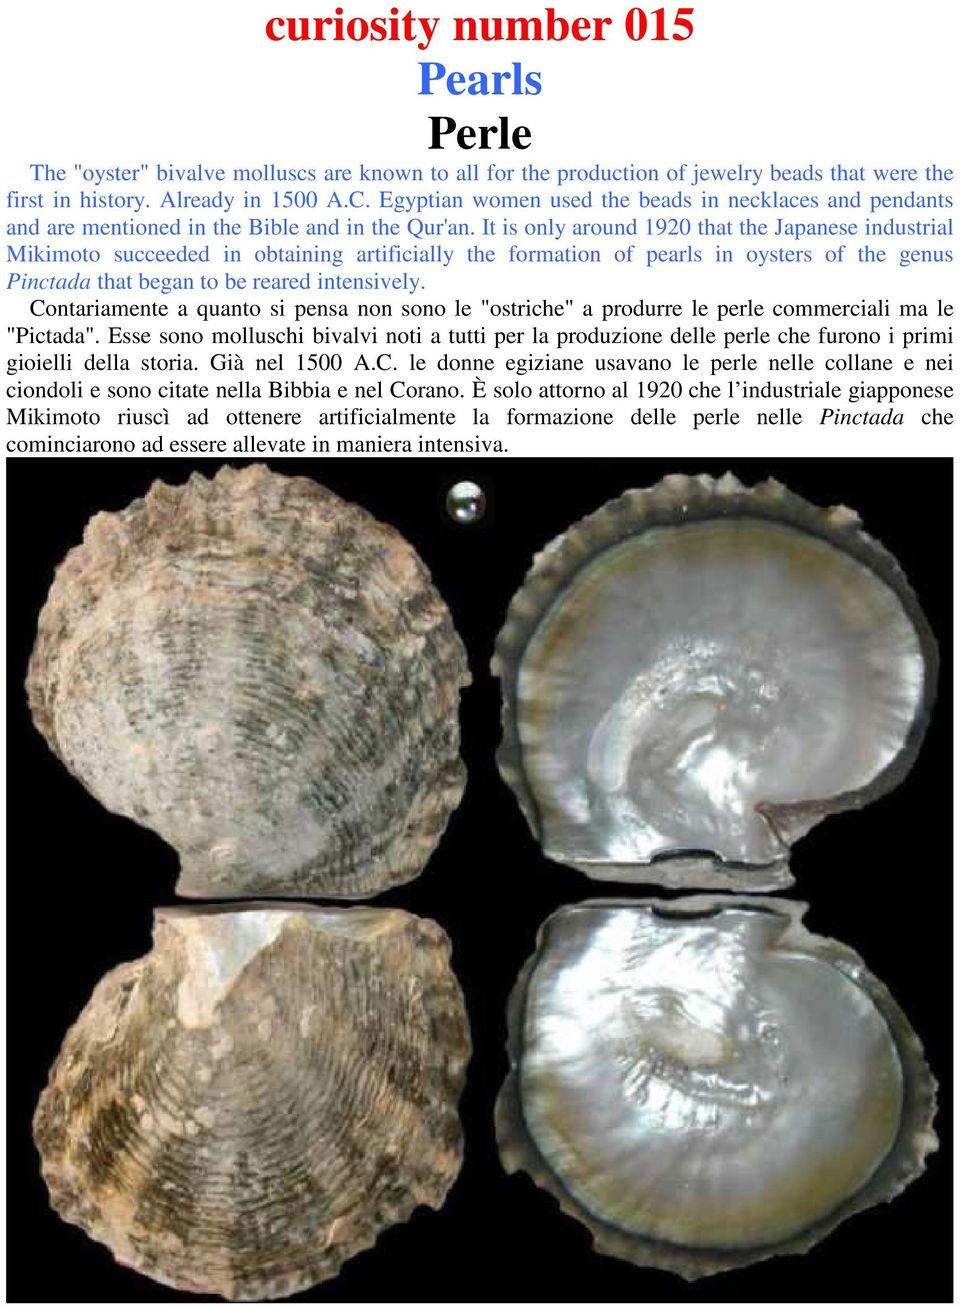 It is only around 1920 that the Japanese industrial Mikimoto succeeded in obtaining artificially the formation of pearls in oysters of the genus Pinctada that began to be reared intensively.